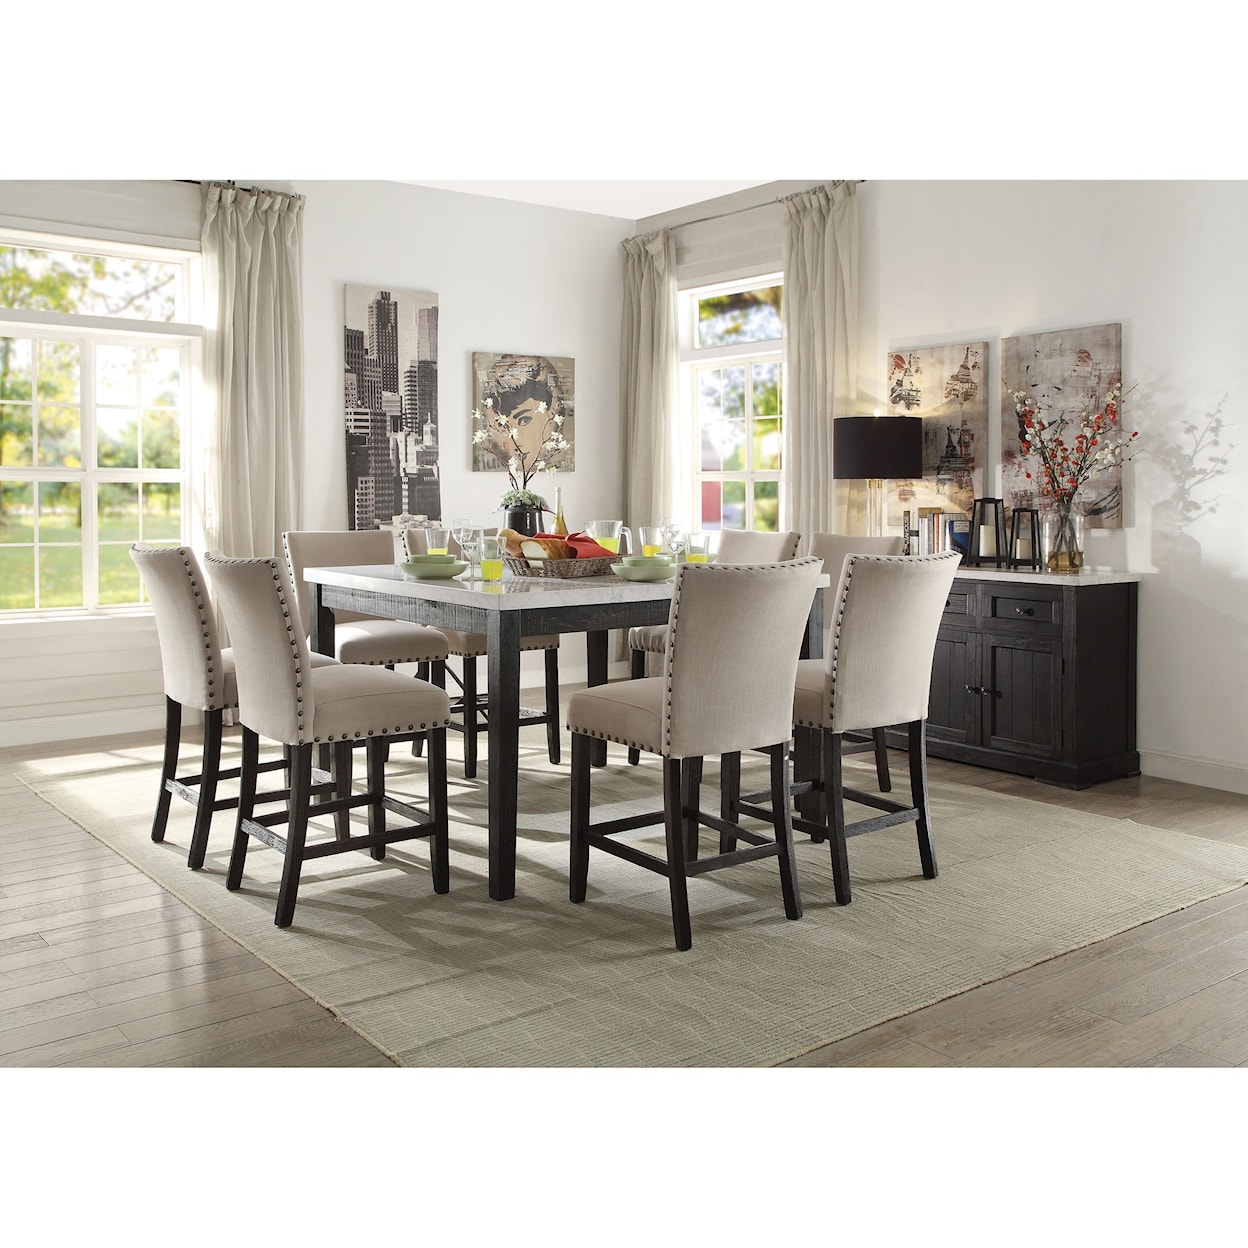 Acme Furniture Nolan Set of 2 Counter Height Chairs